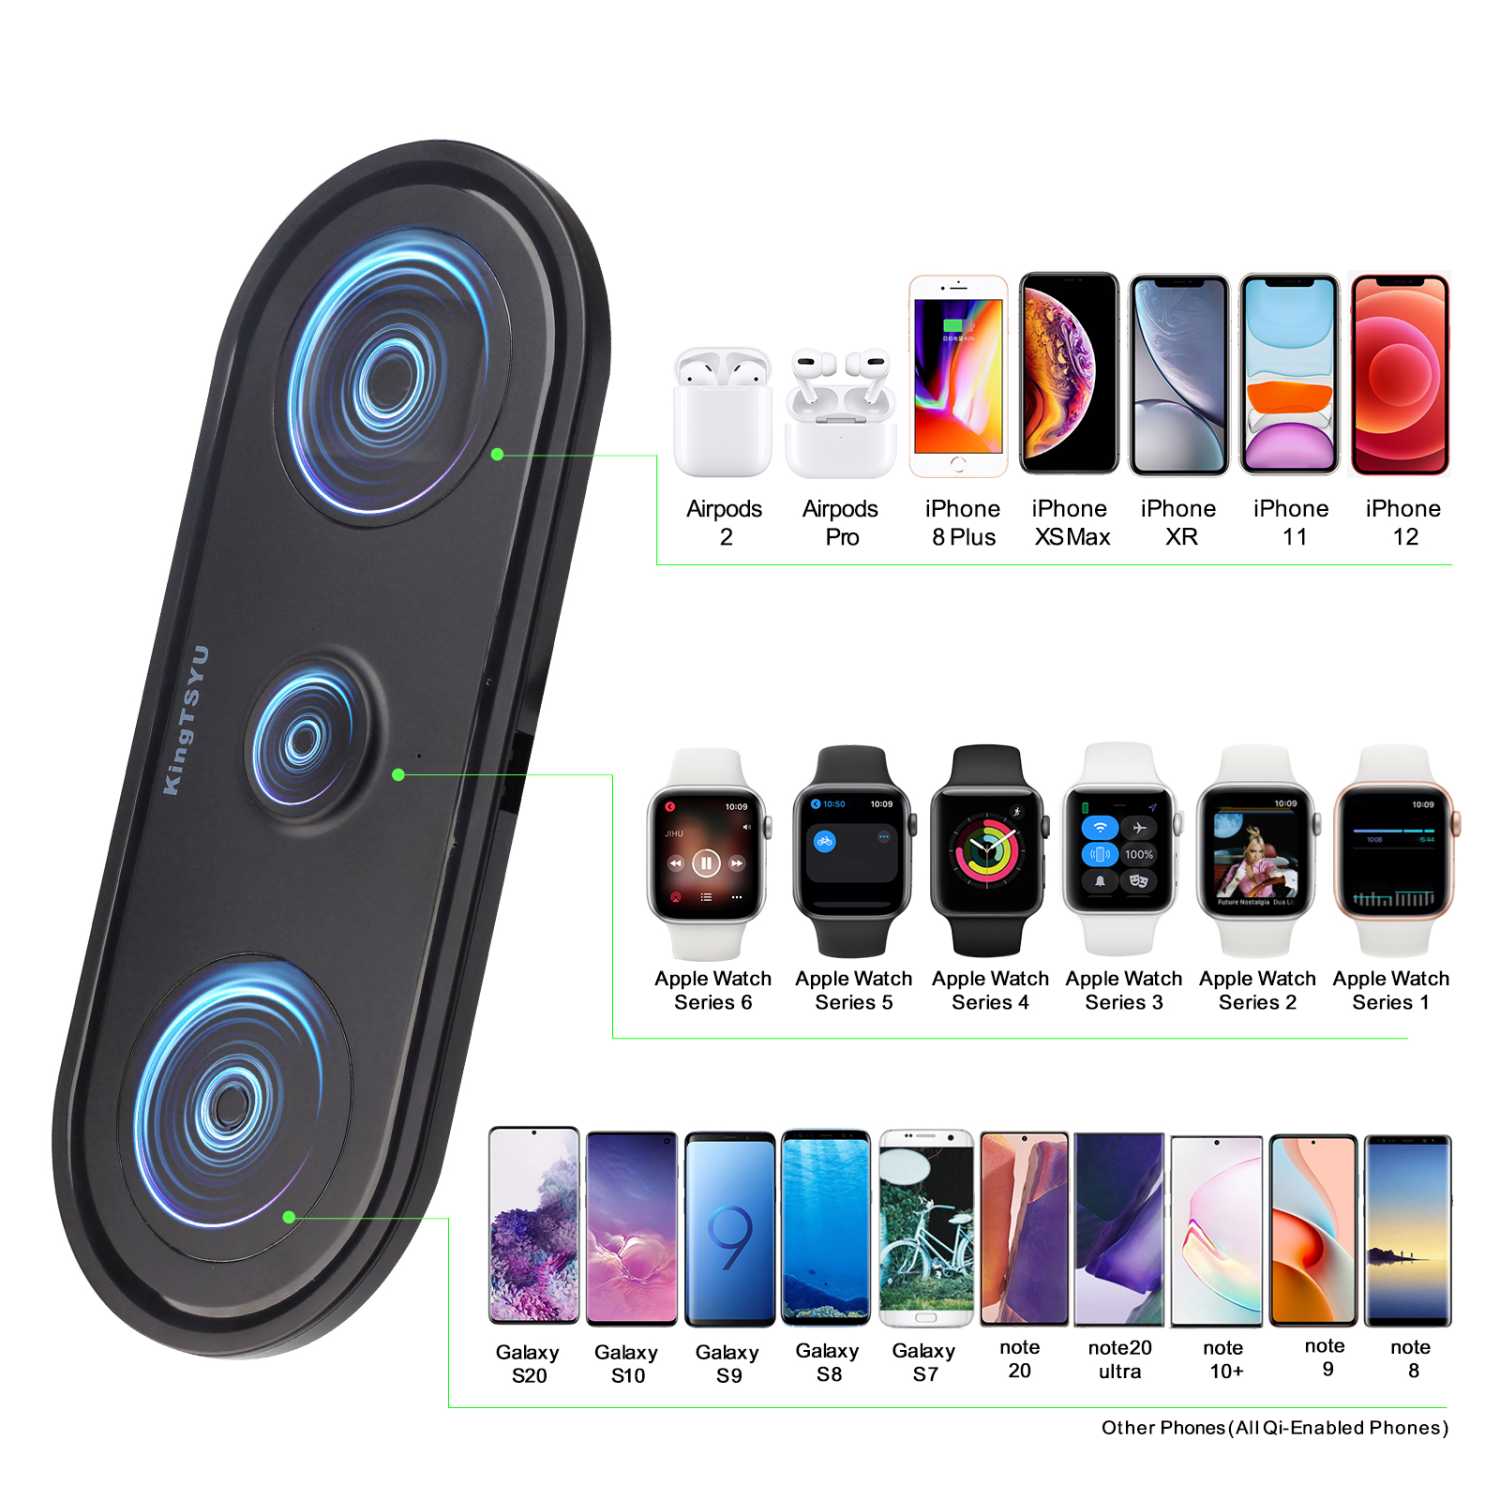 3 in 1 Multi Wireless Charging Station Pad for iPhone Airpods Iwatch Charger Combo, Stand Dock for Apple Watch 6/5/4/3/2/1 AirPods Pro 2 iPhone 13/12/XS/XR/Xs Max and Samsung Galaxy Phones, KingTSYU